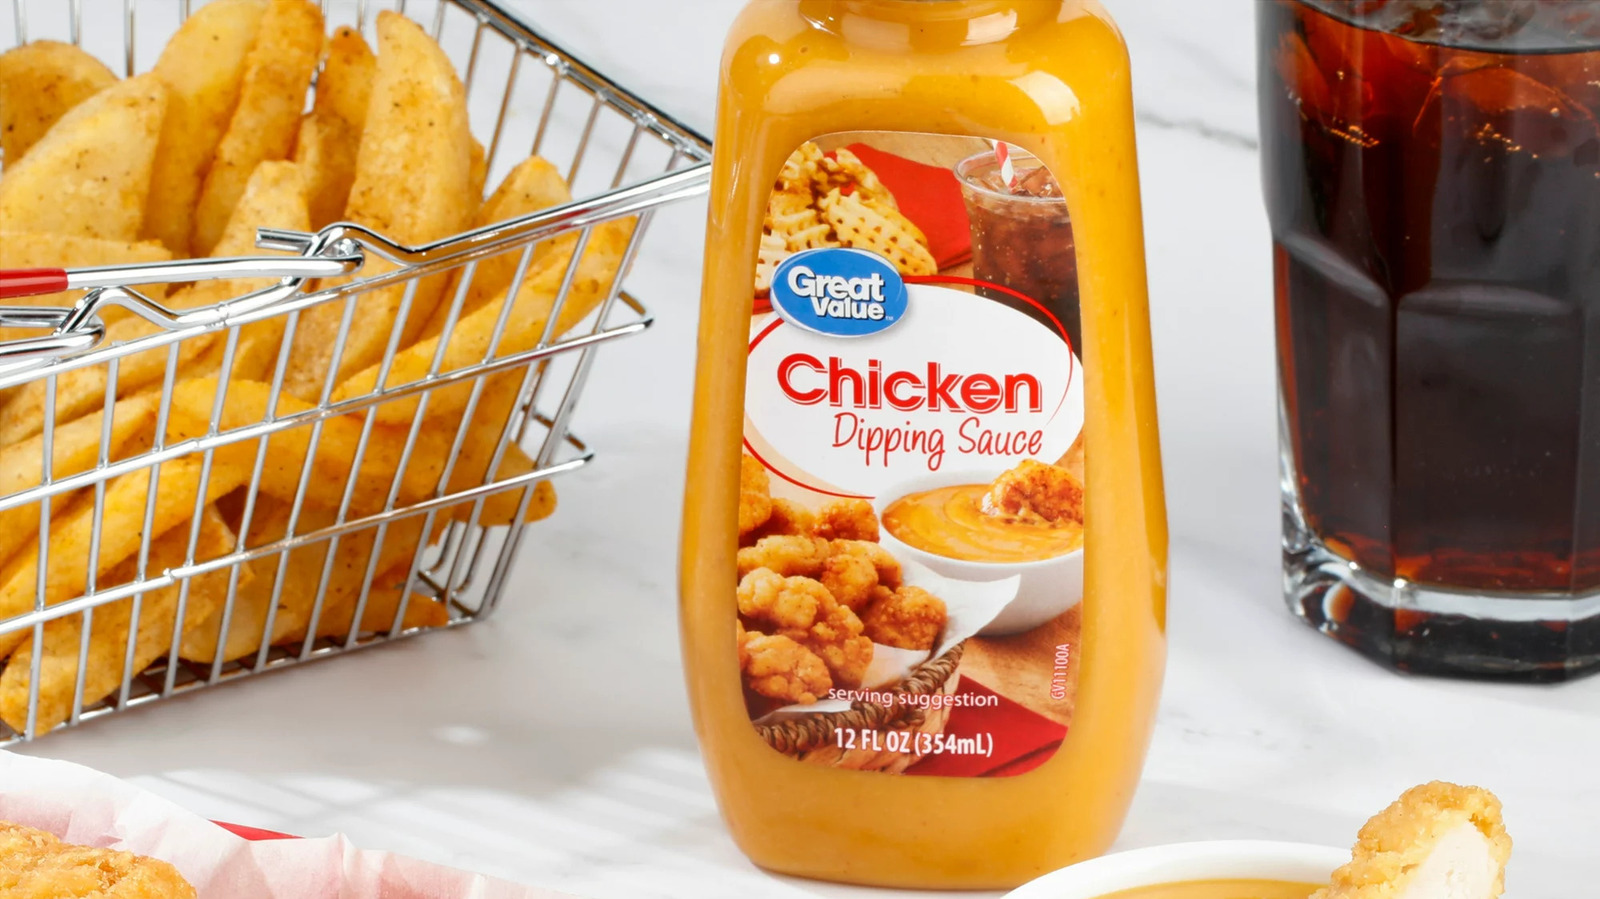 https://www.thedailymeal.com/img/gallery/walmarts-chicken-dipping-sauce-is-a-total-chick-fil-a-copycat/l-intro-1688121507.jpg